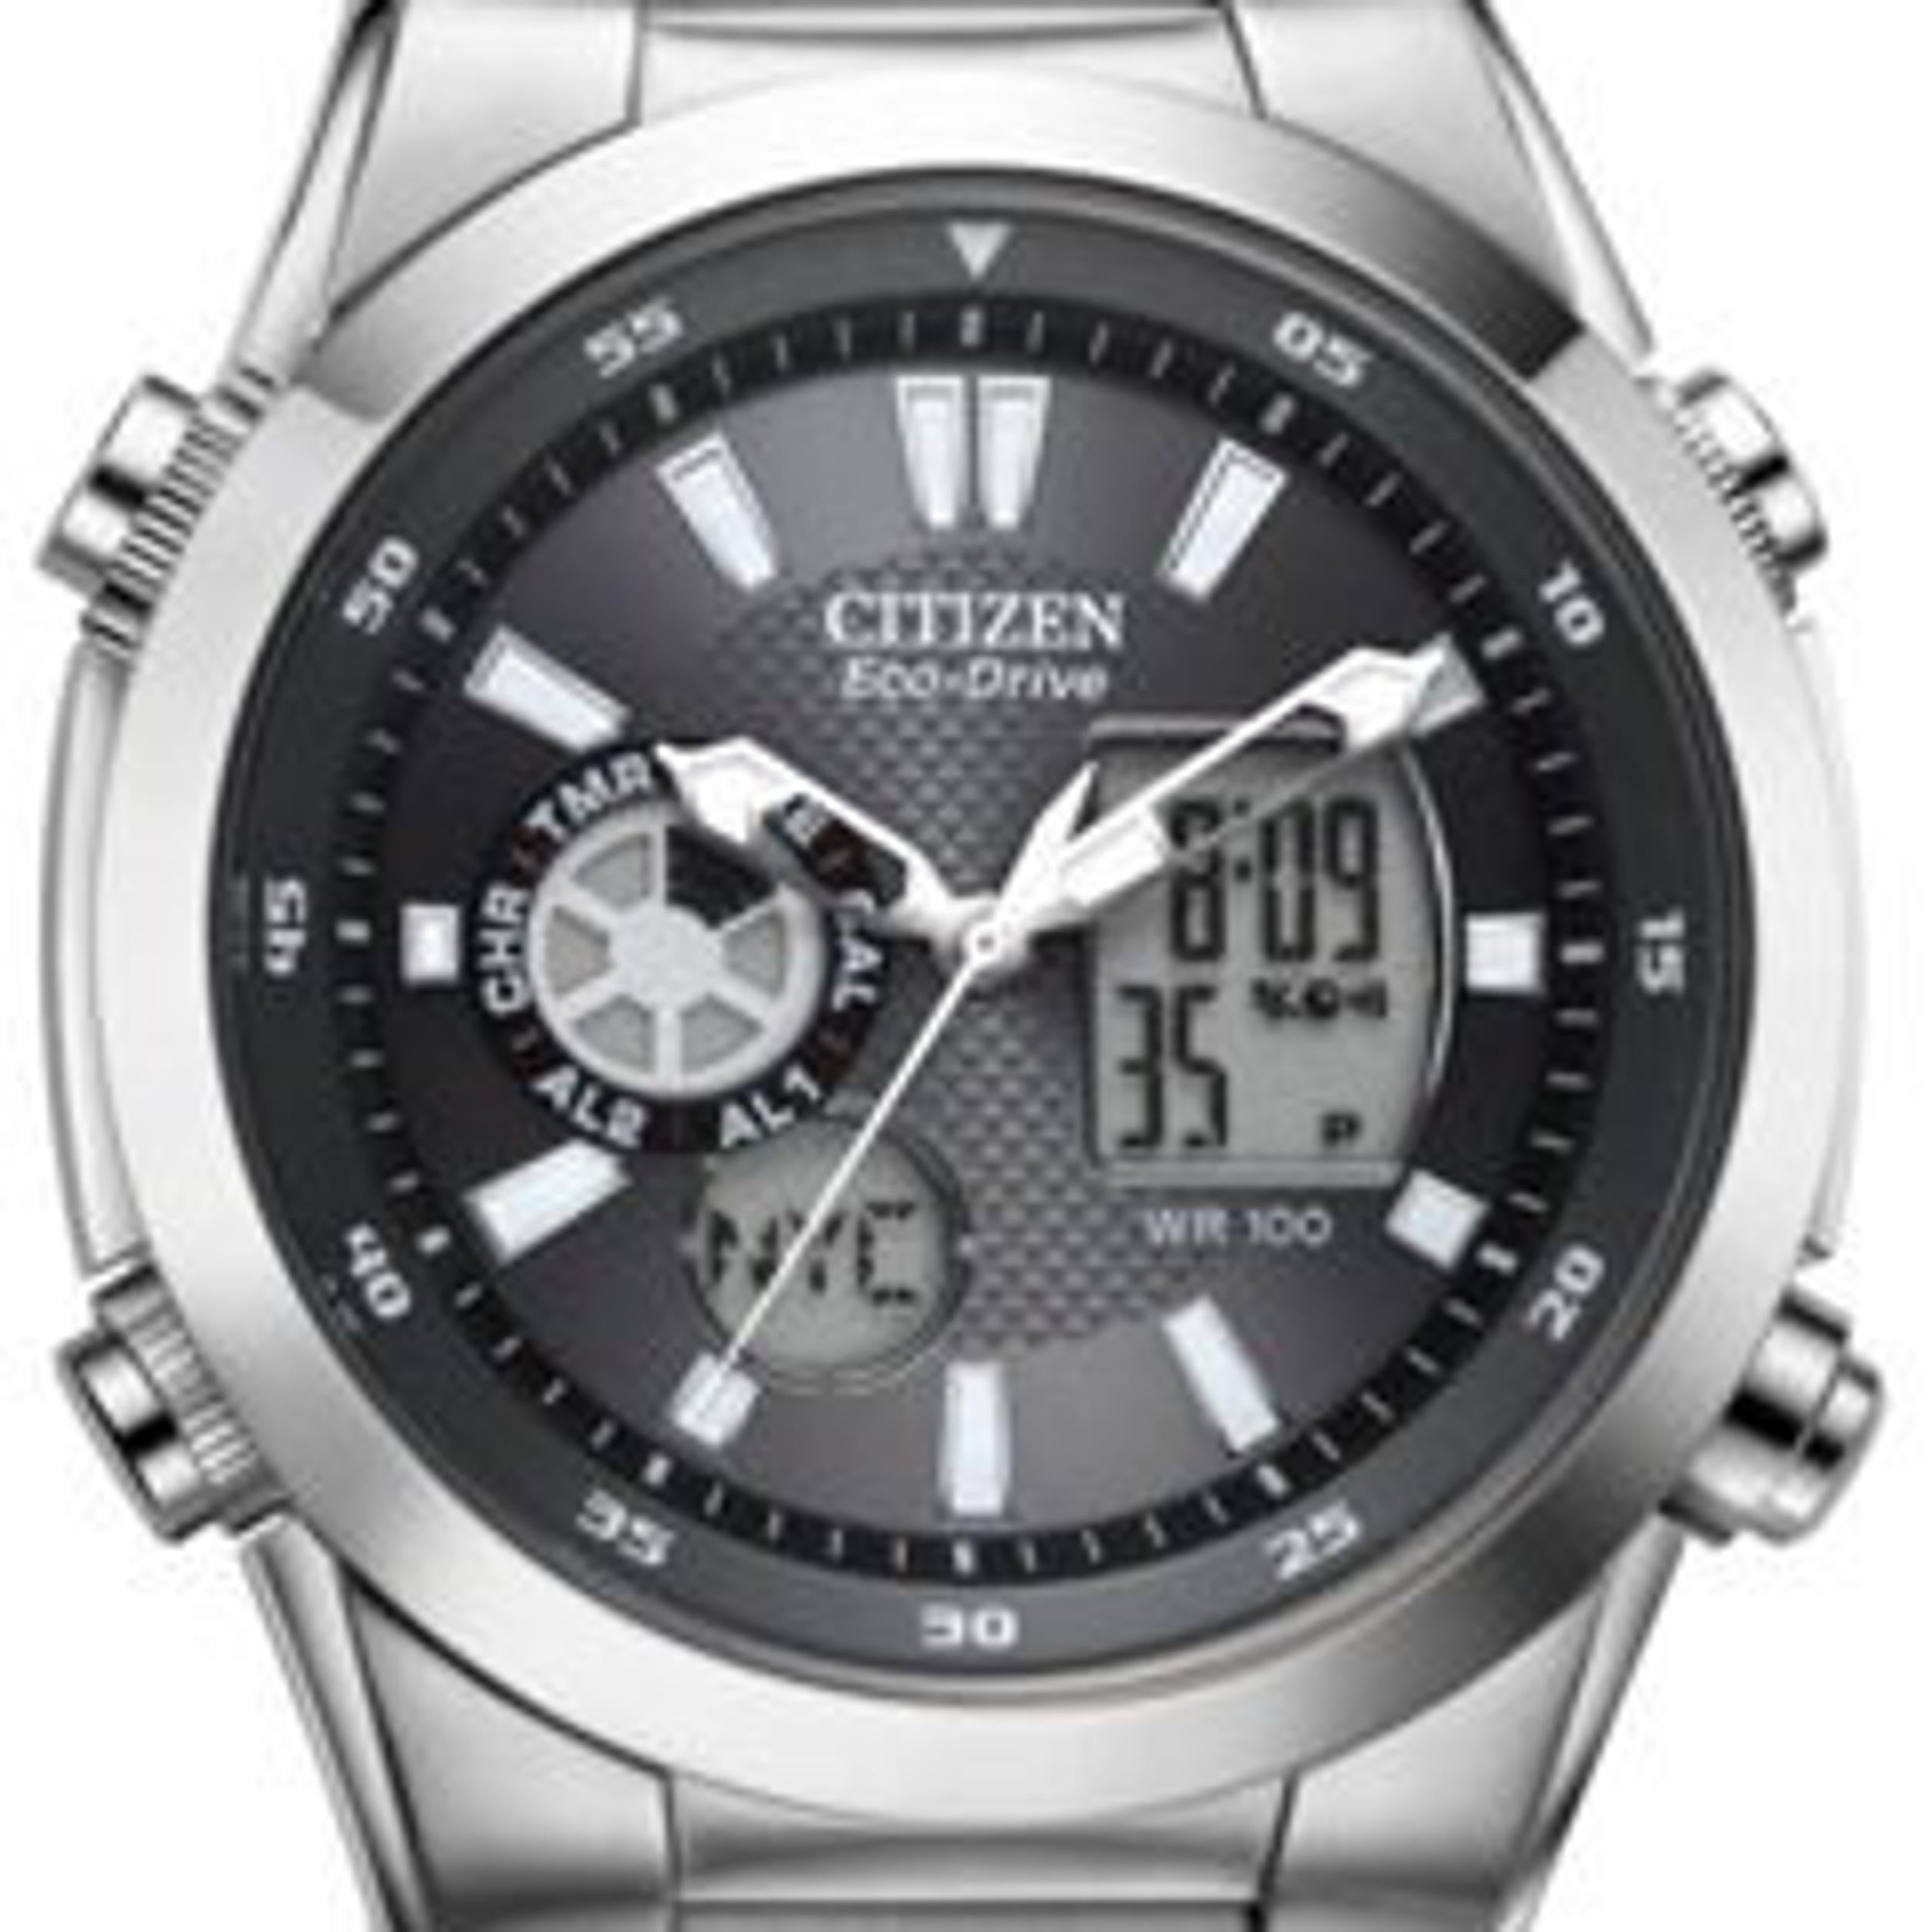 This brand new Citizen   is a beautiful  timepiece that is powered by  movement which is cased in a  case. It has a round shape face,  dial and has hand  style markers. It is completed with a  band that opens and closes with a . This watch comes